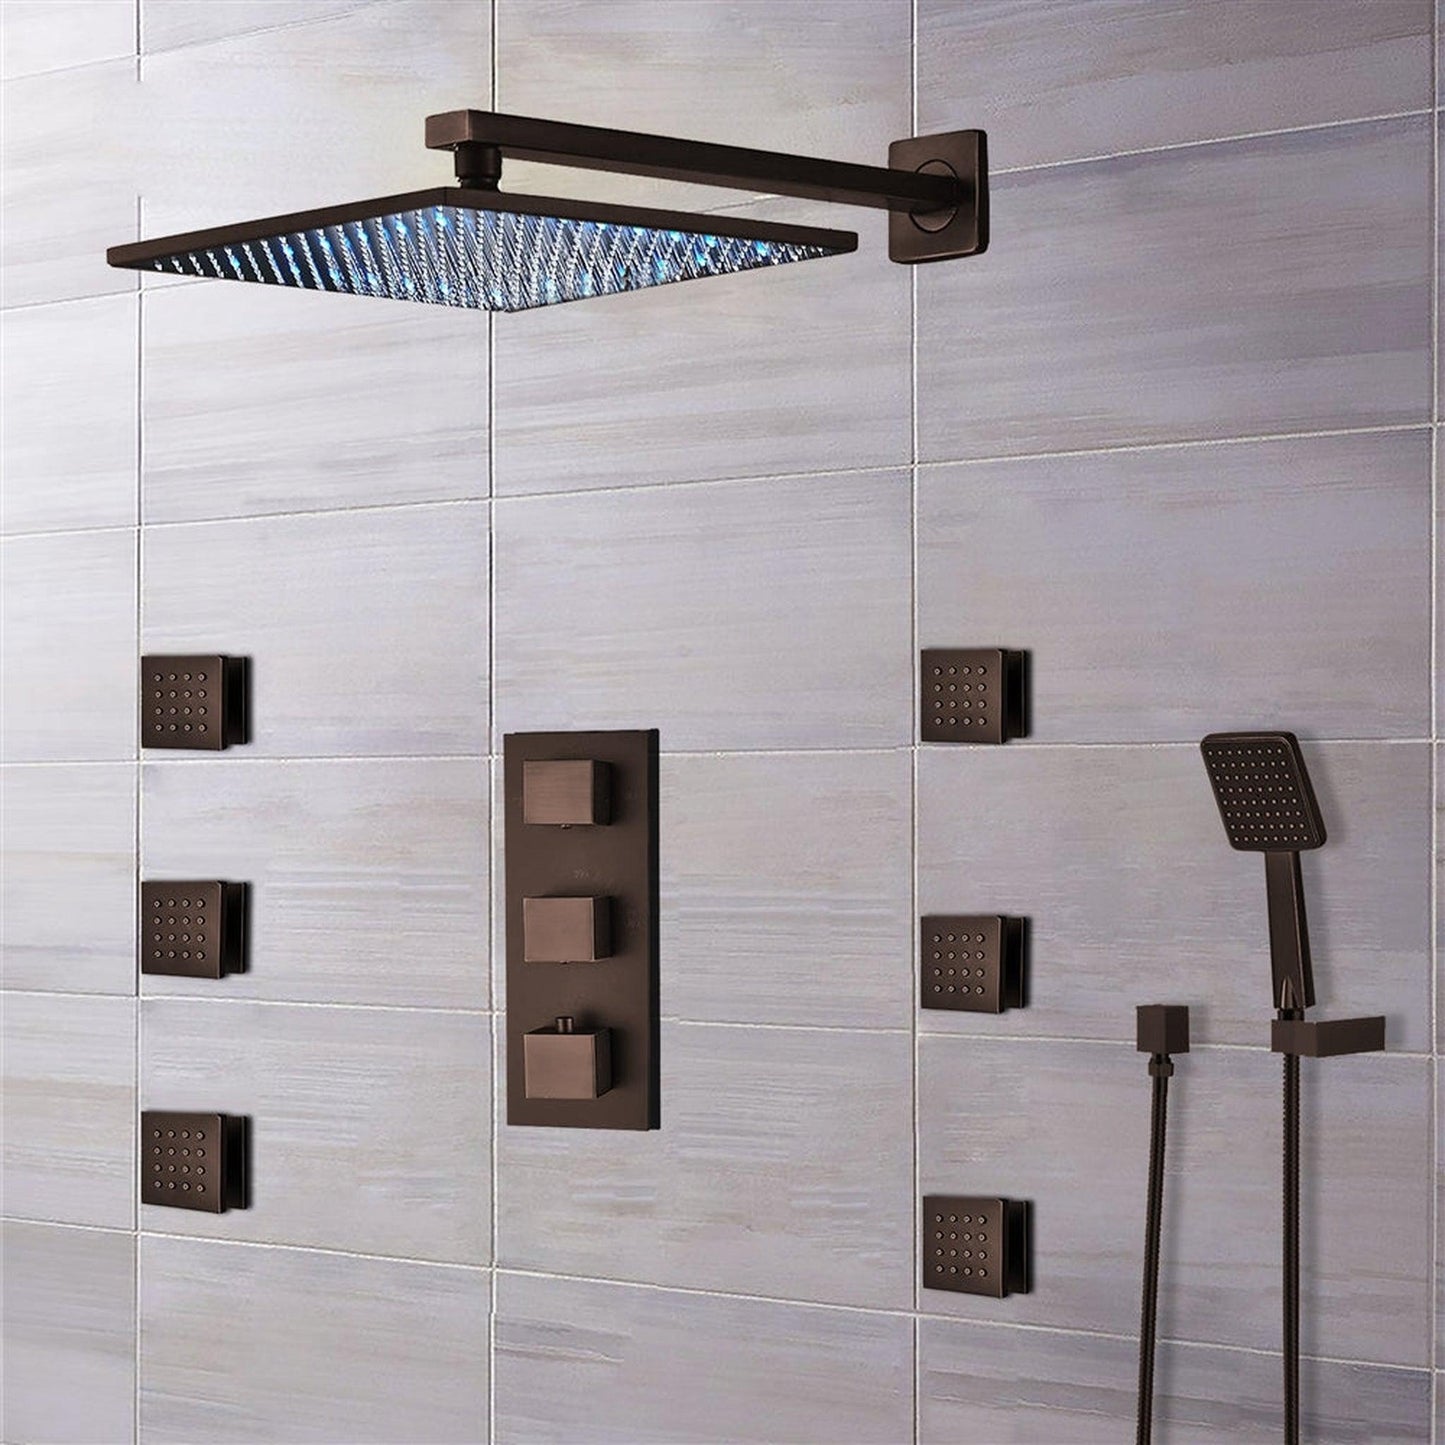 Fontana Sierra 8" Light Oil Rubbed Bronze Square Ceiling Mounted LED Shower System With 6-Jet Body Sprays and Hand Shower